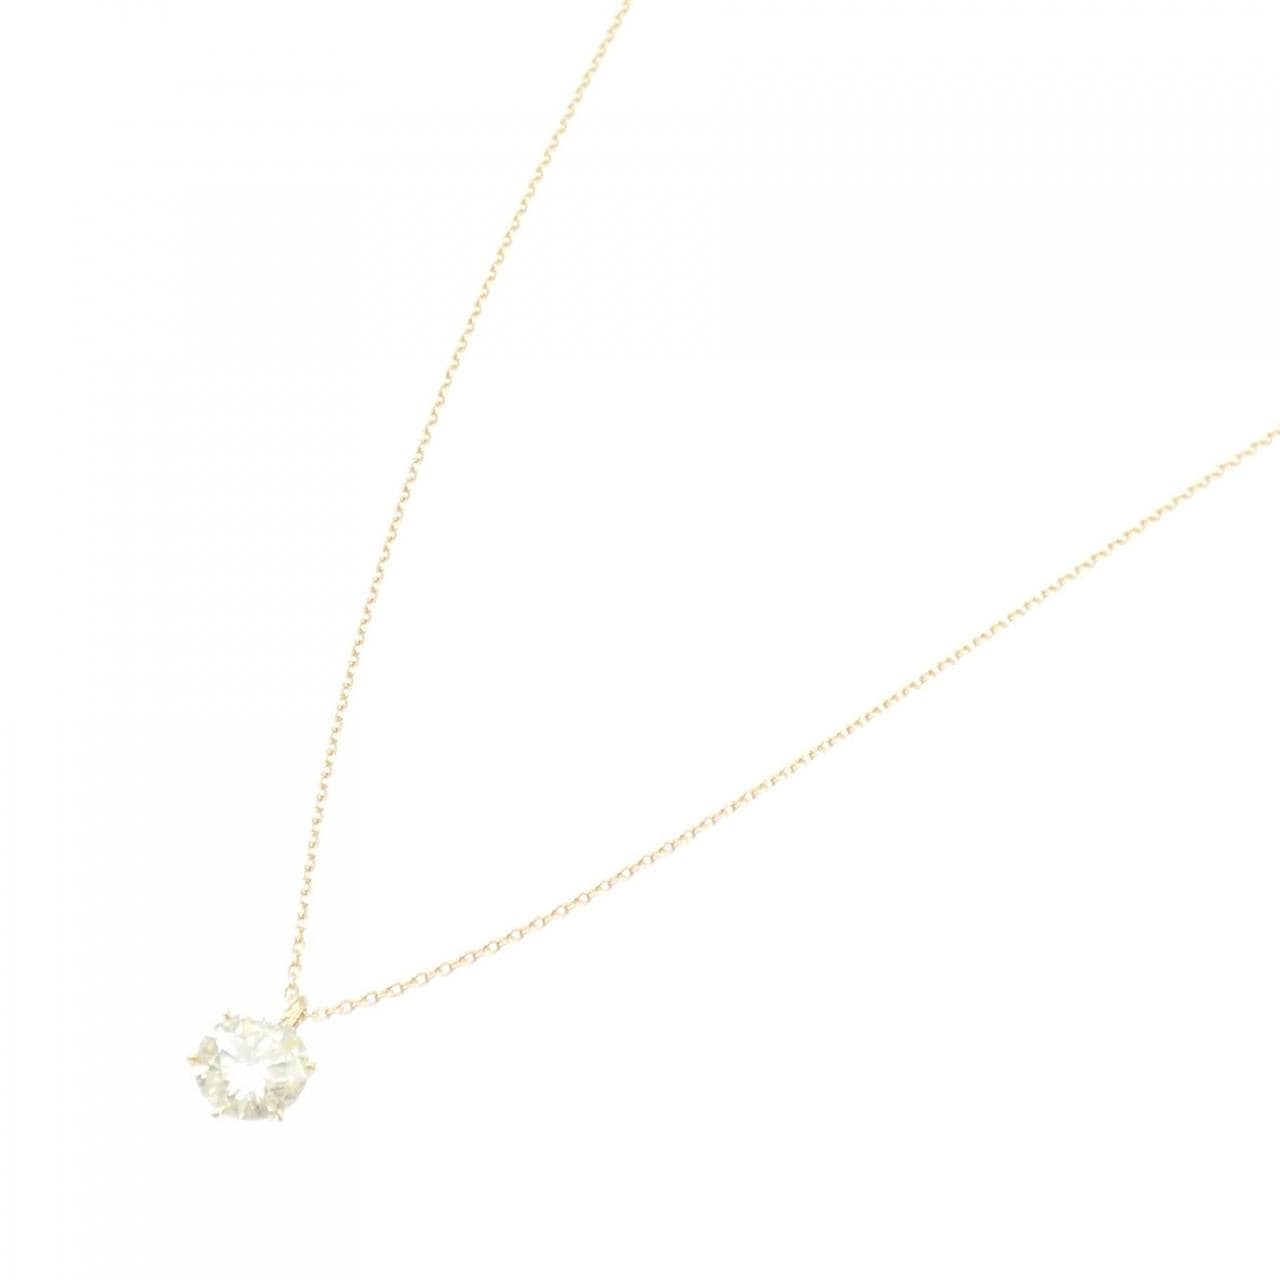 [Remake] K18YG Diamond necklace 1.034CT LY SI2 EXT